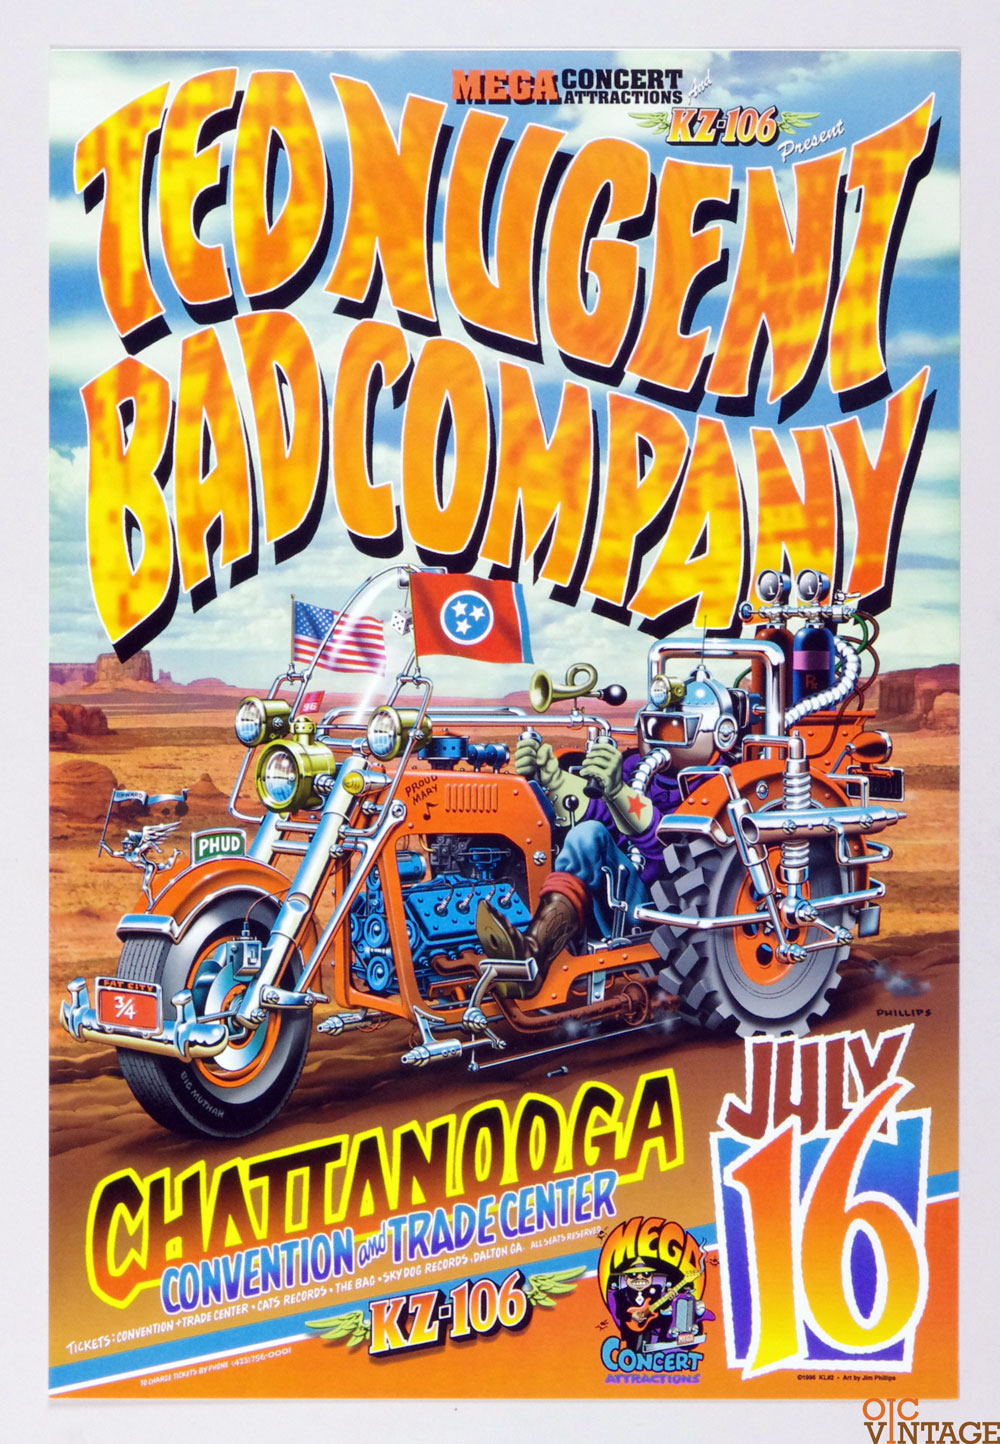 Ted Nugent Poster w/ Bad Company 1996 Jul 16 Chattanooga TN Jim Phillips